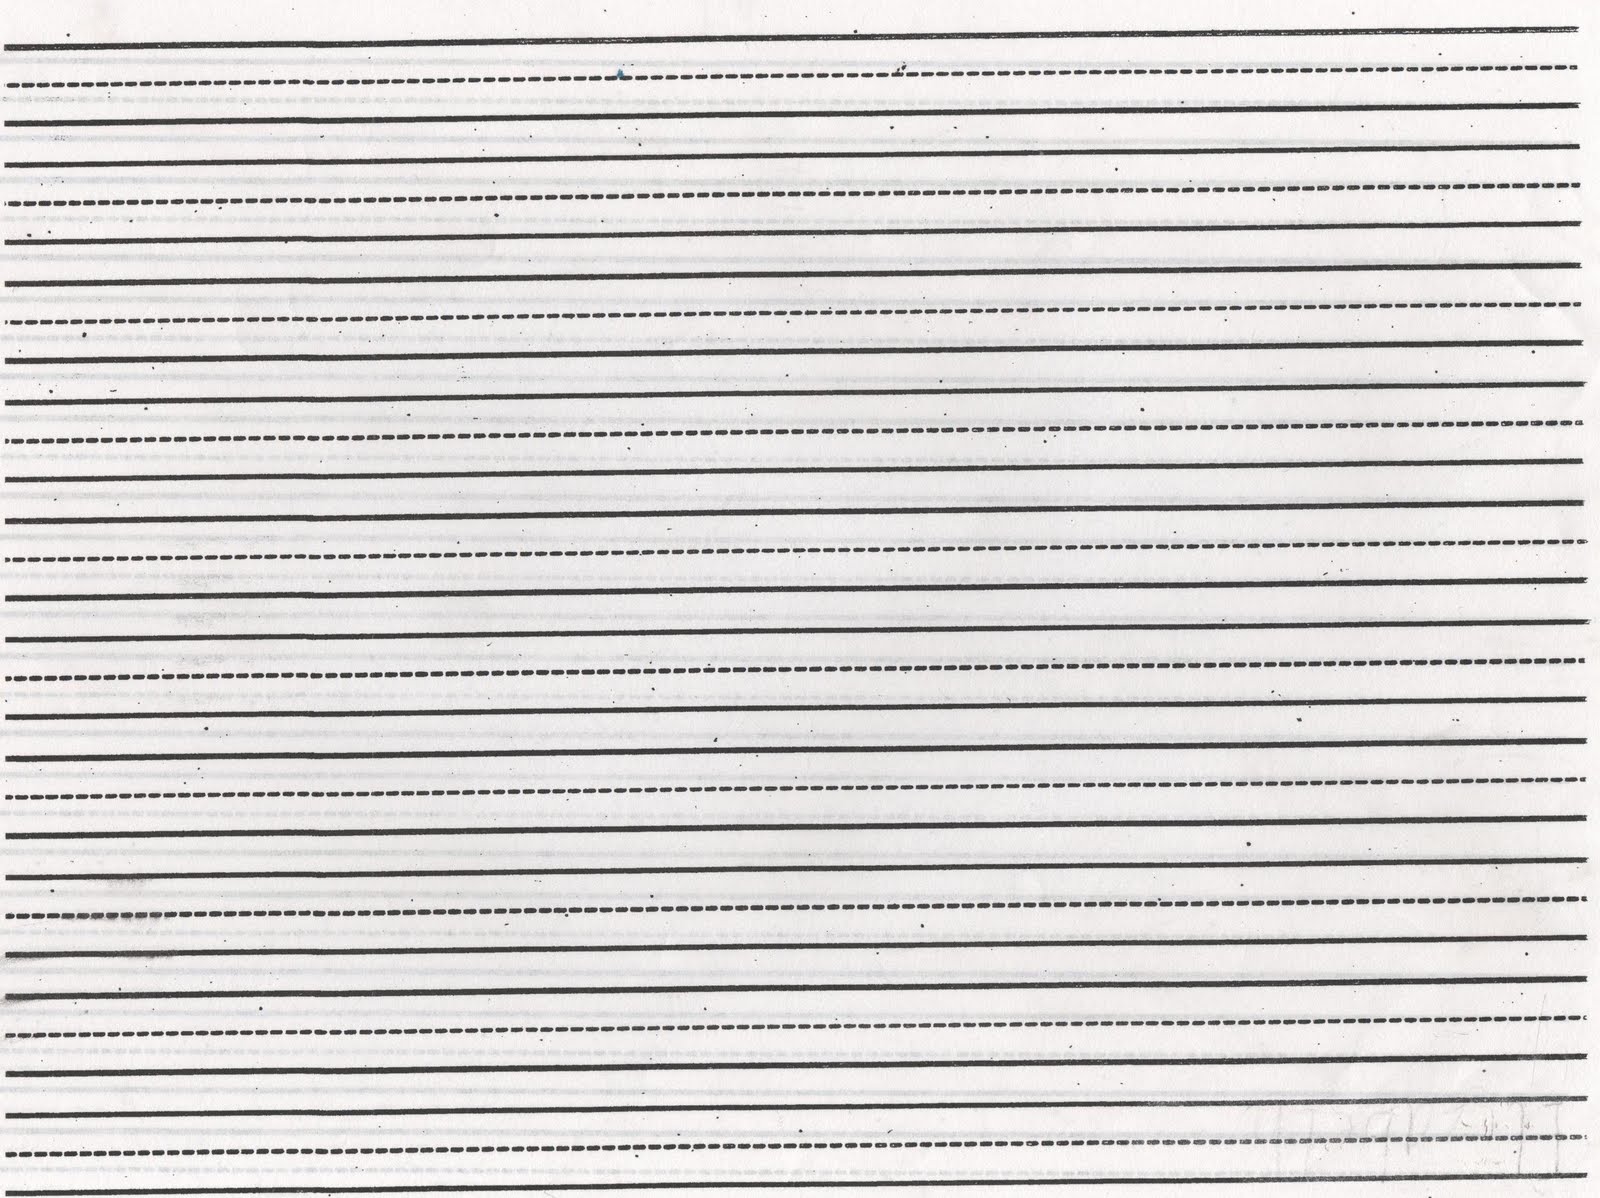 6-best-images-of-elementary-lined-writing-paper-printable-free